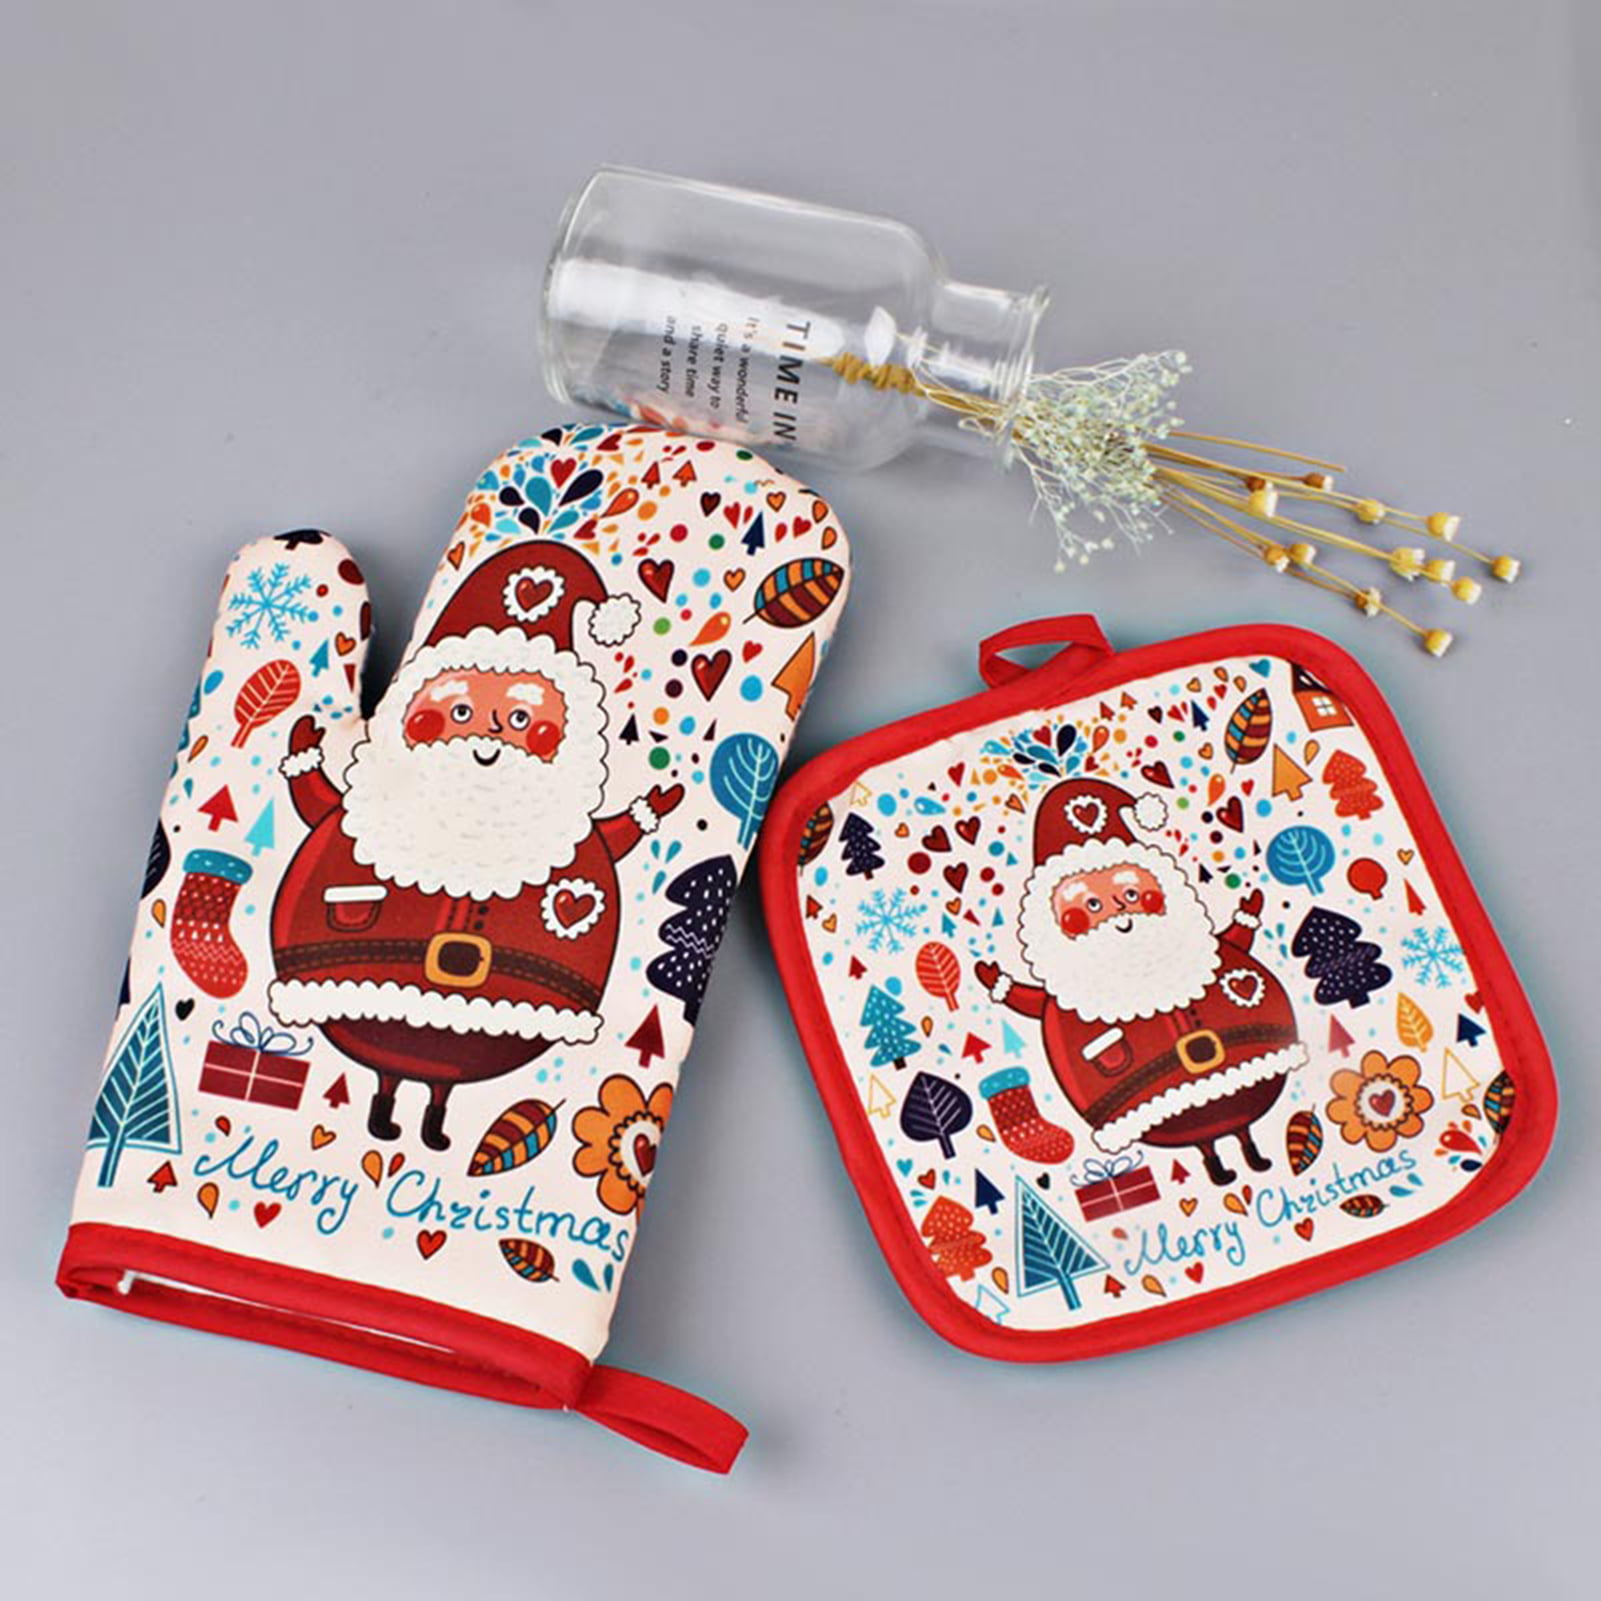 Christmas Oven Mitts Scraper Gift - GROBRO7 Happy Holiday Greeting Card  Gift Set Heat Resistant Gloves with Hanging Loop Merry Xmas Wooden Handle